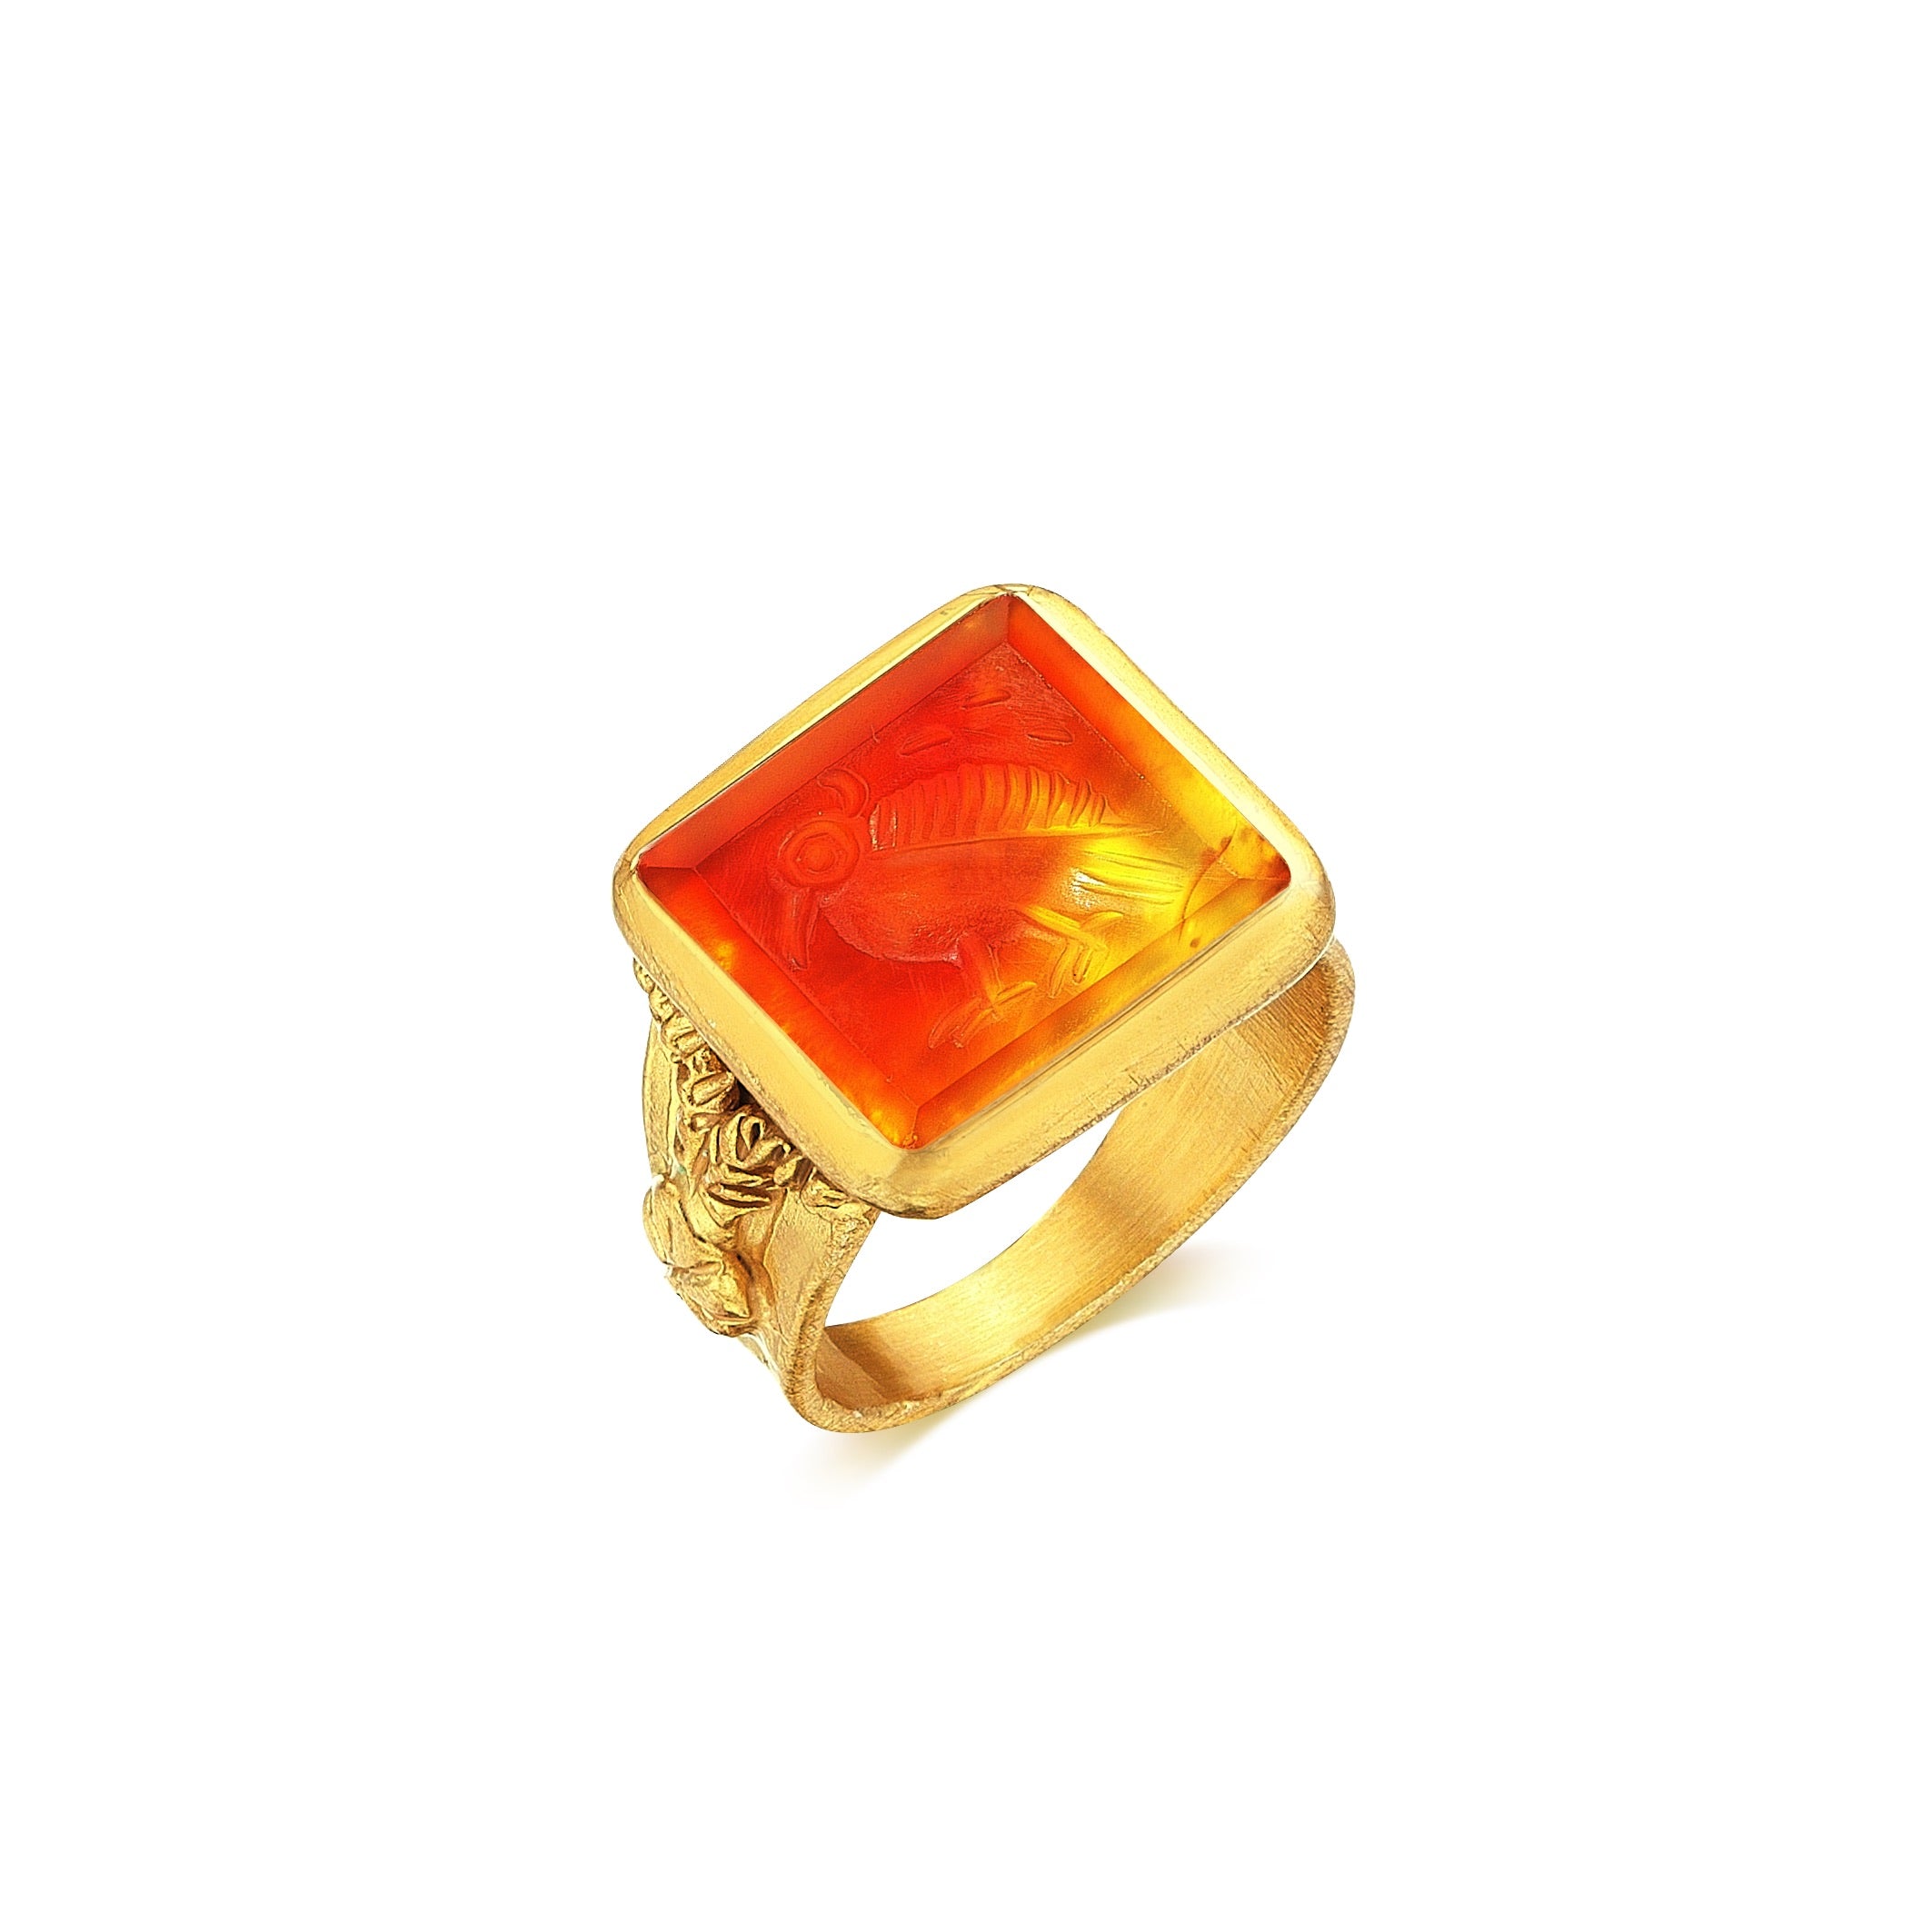 The Agate Ring